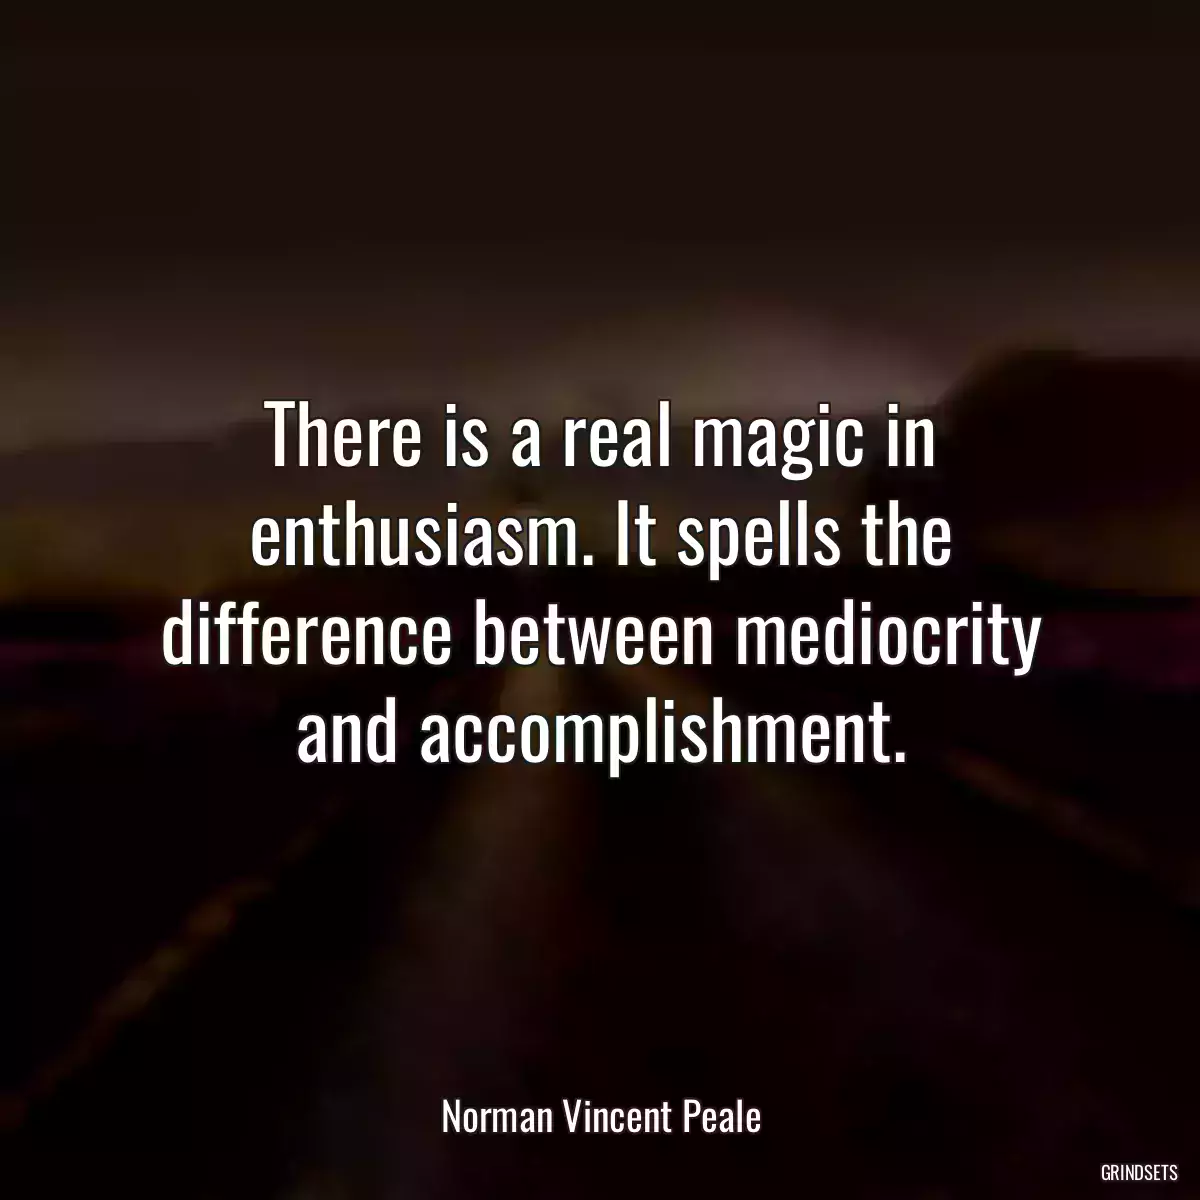 There is a real magic in enthusiasm. It spells the difference between mediocrity and accomplishment.